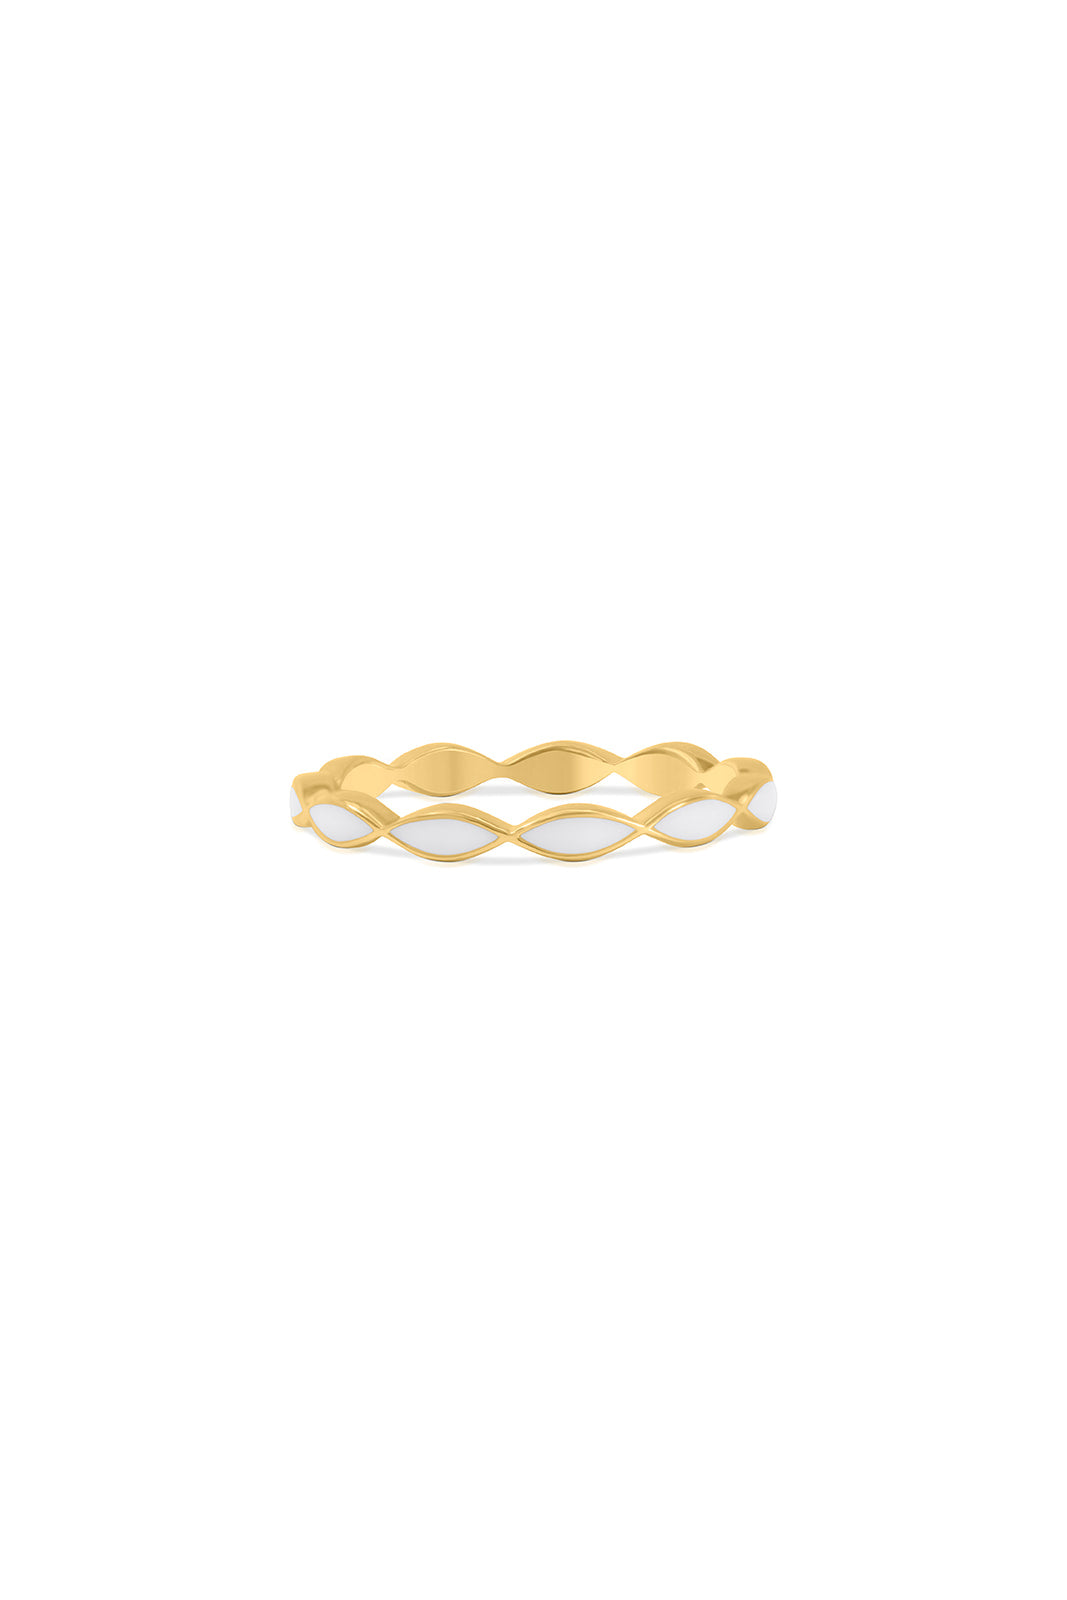 Breastmilk Eternity Band - 9ct Gold